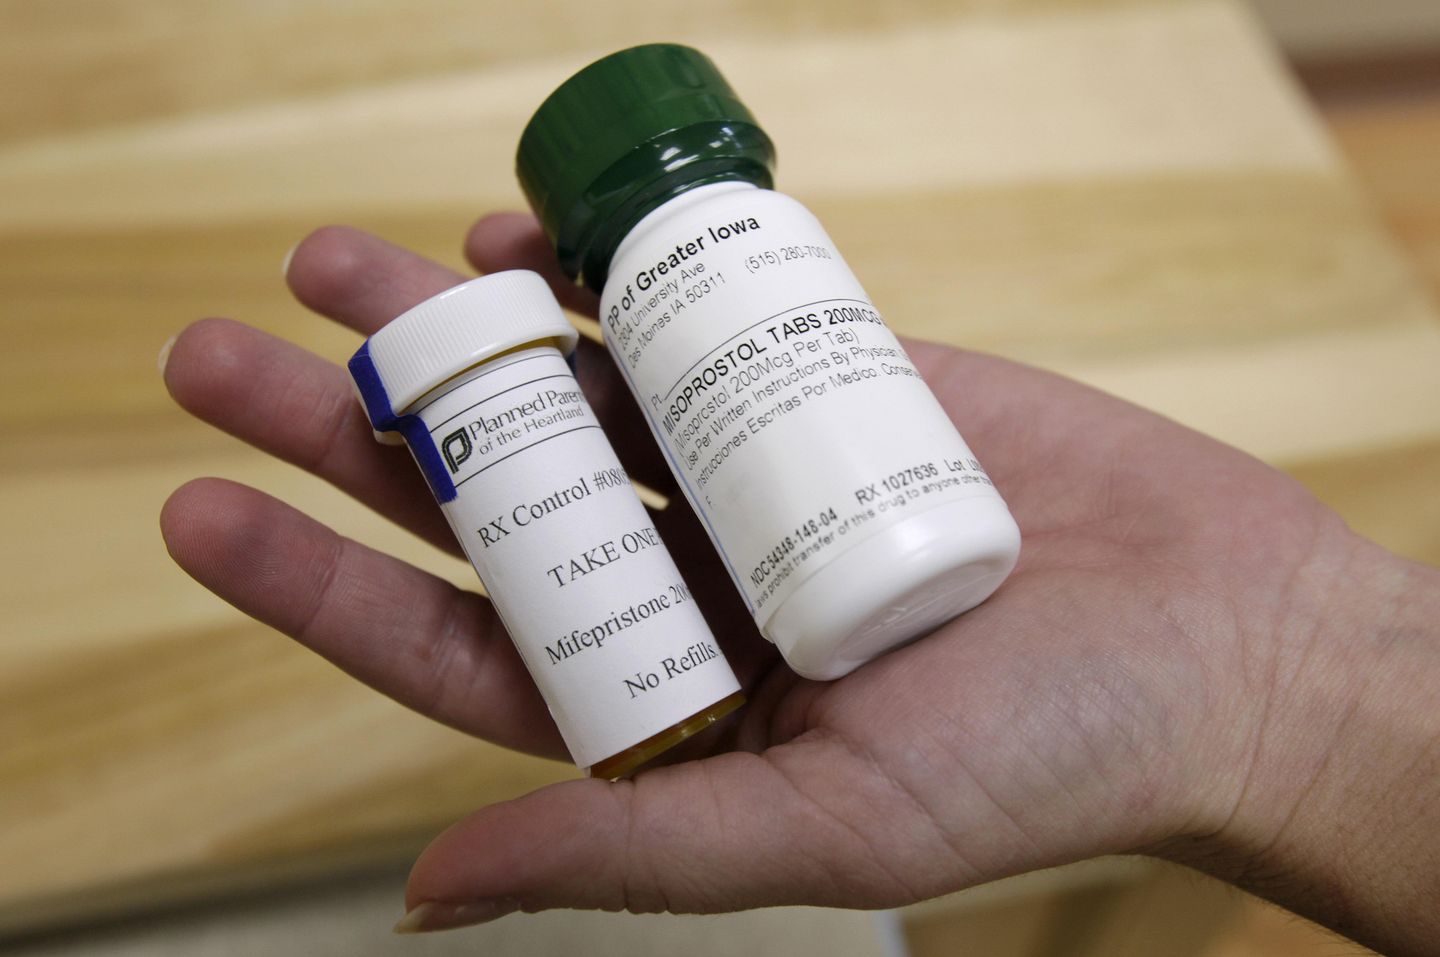 Federal appeals court preserves access to abortion drug for now, tightens rules